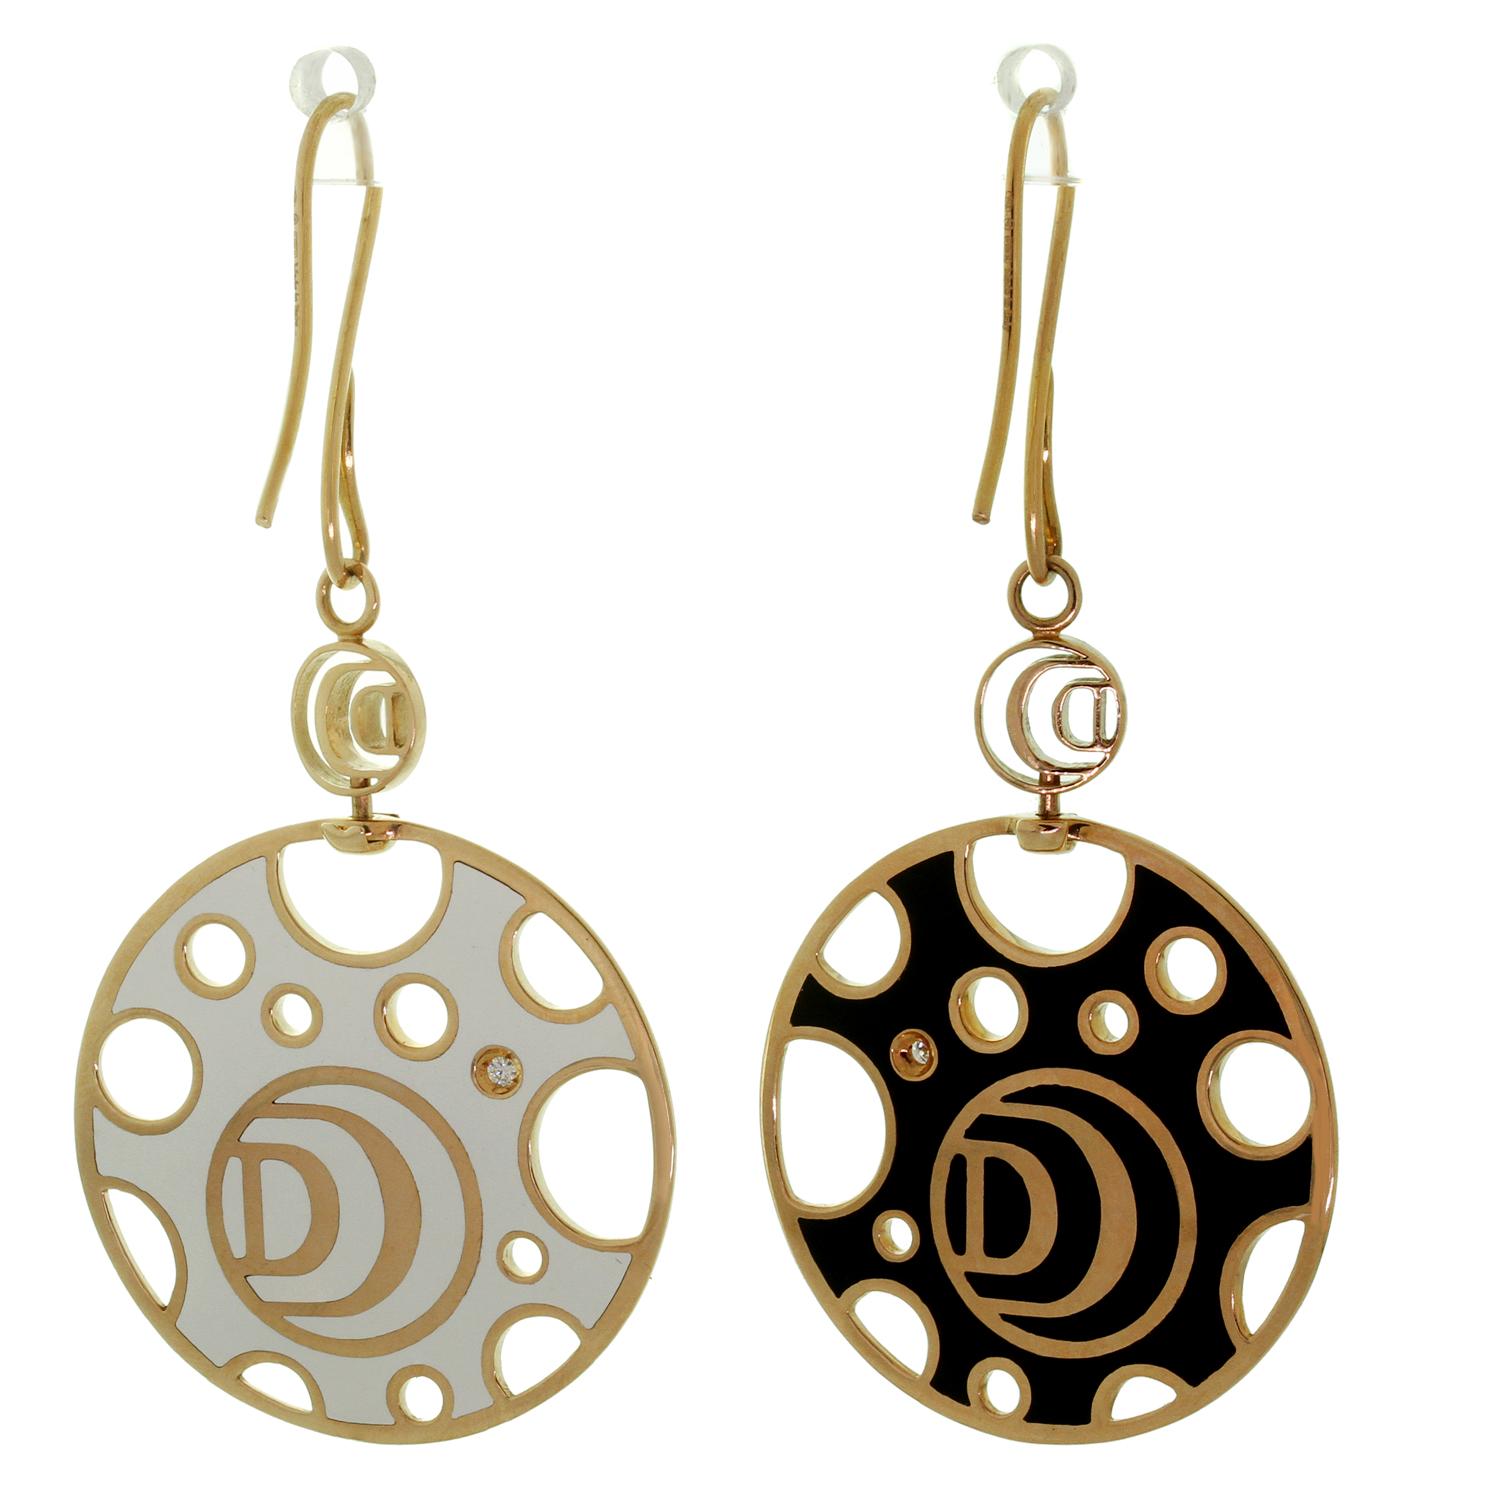 These gorgeous Damiani french wire drop earrings are crafted in 18k rose gold and feature versatile turnable large disks set with white enamel on one side and black enamel on the other side, completed with soliaire brilliant-cut round diamonds of an